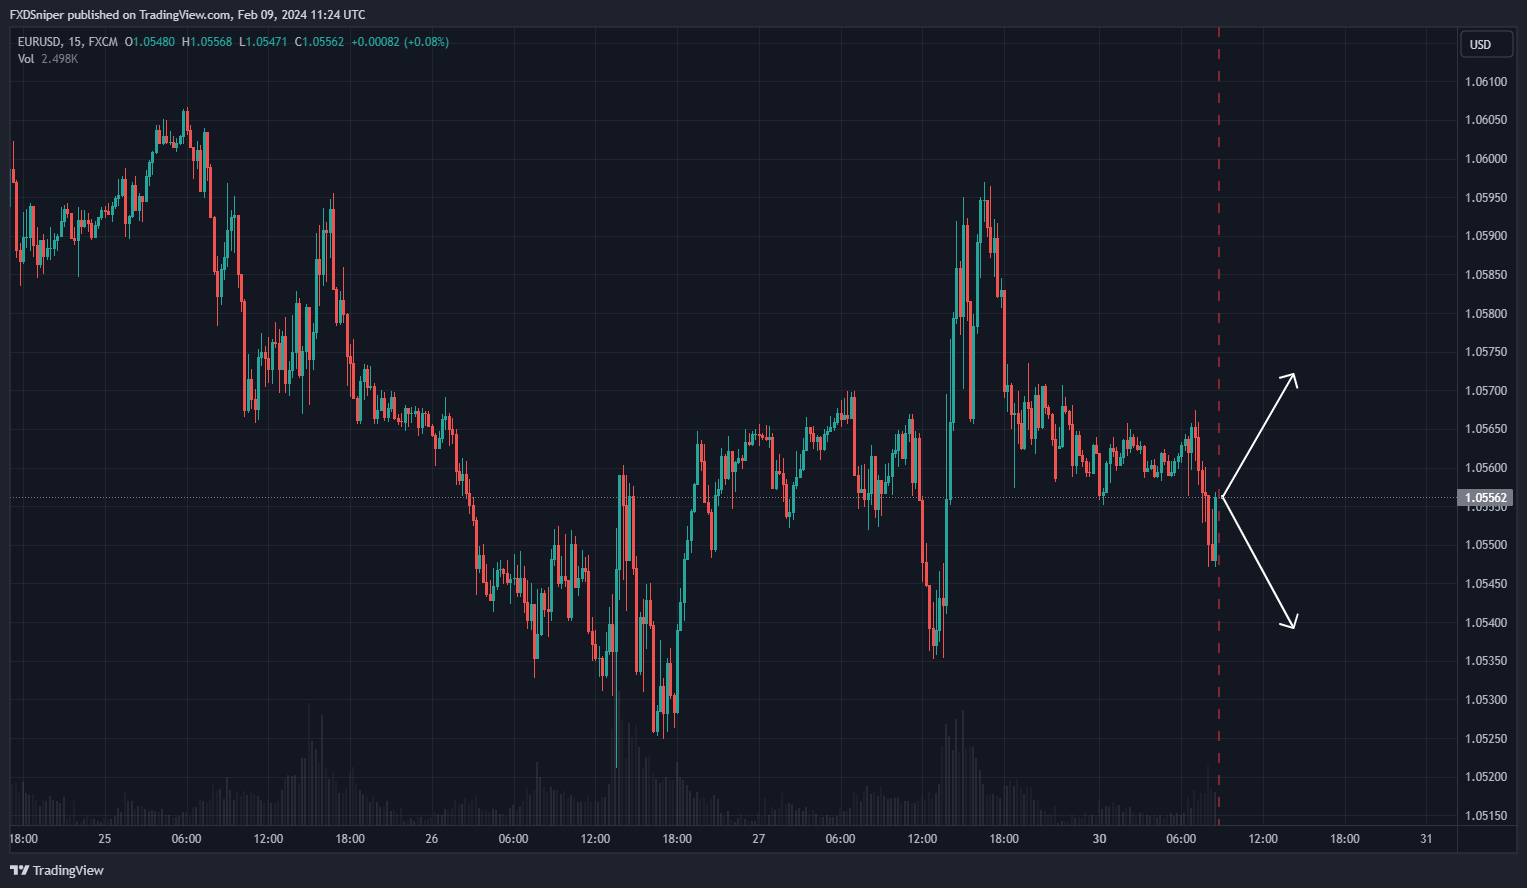 EUR/USD Up or Down?